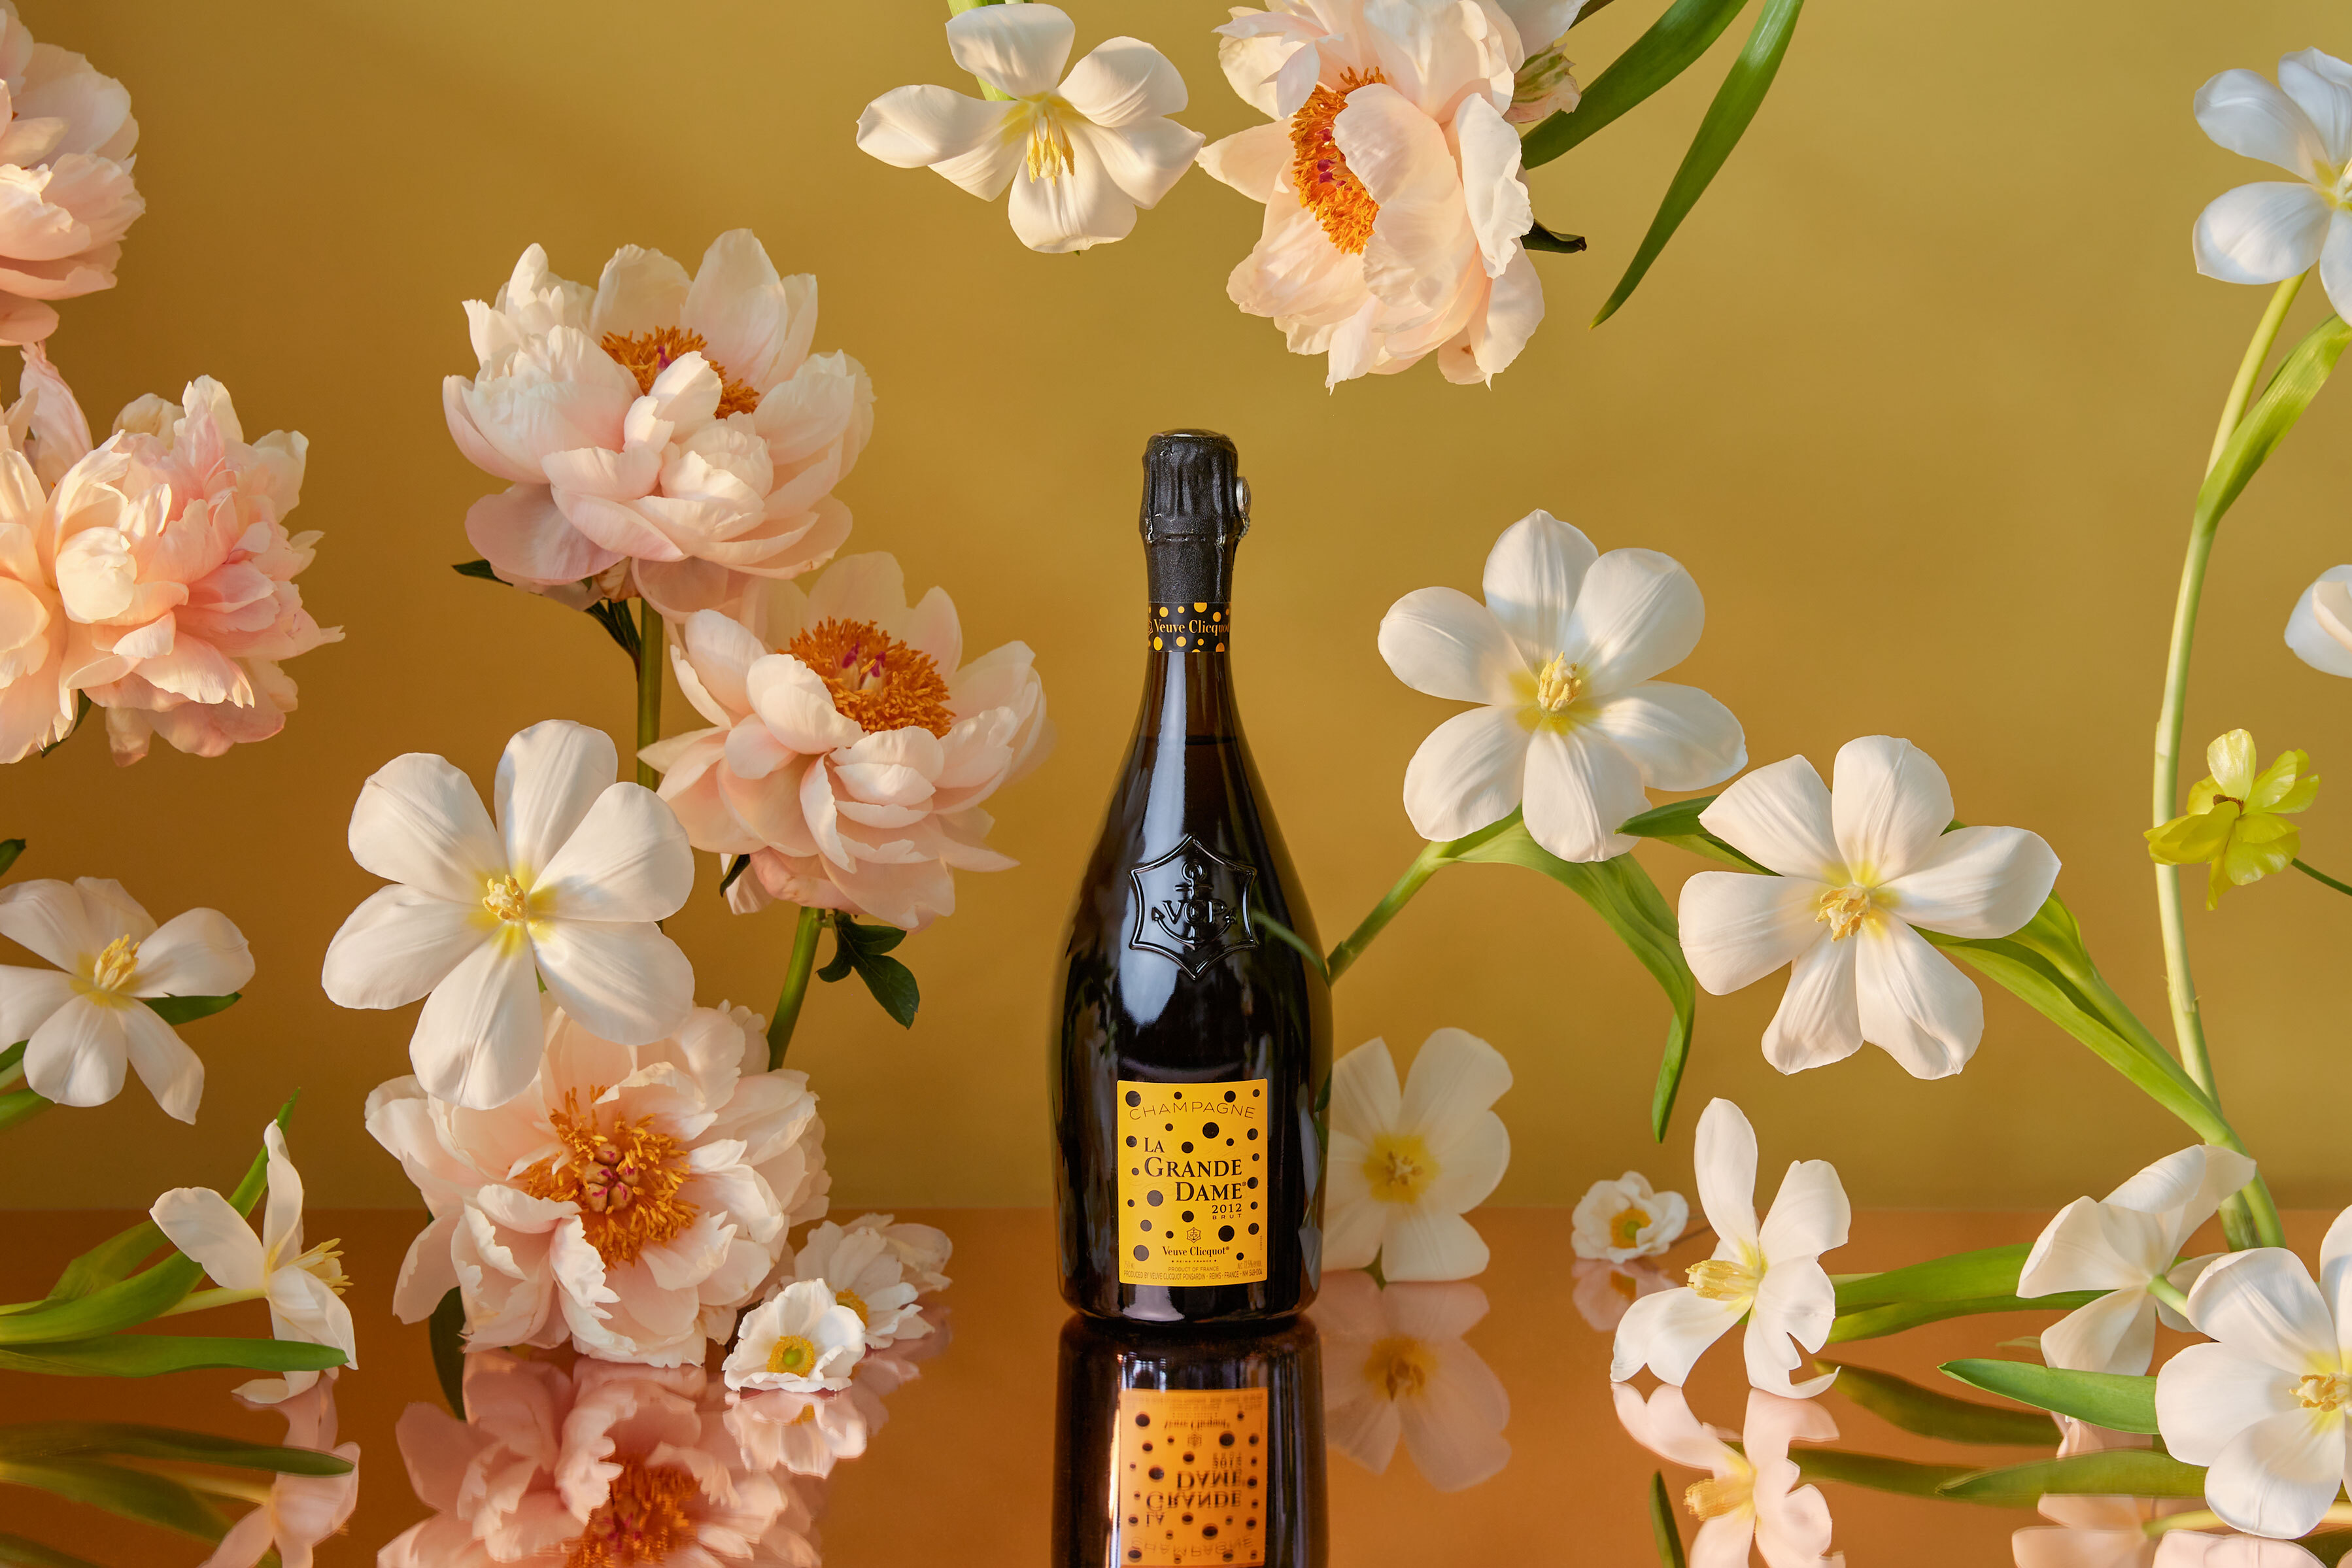 Learning The DNA Of La Grande Dame From Veuve Clicquot